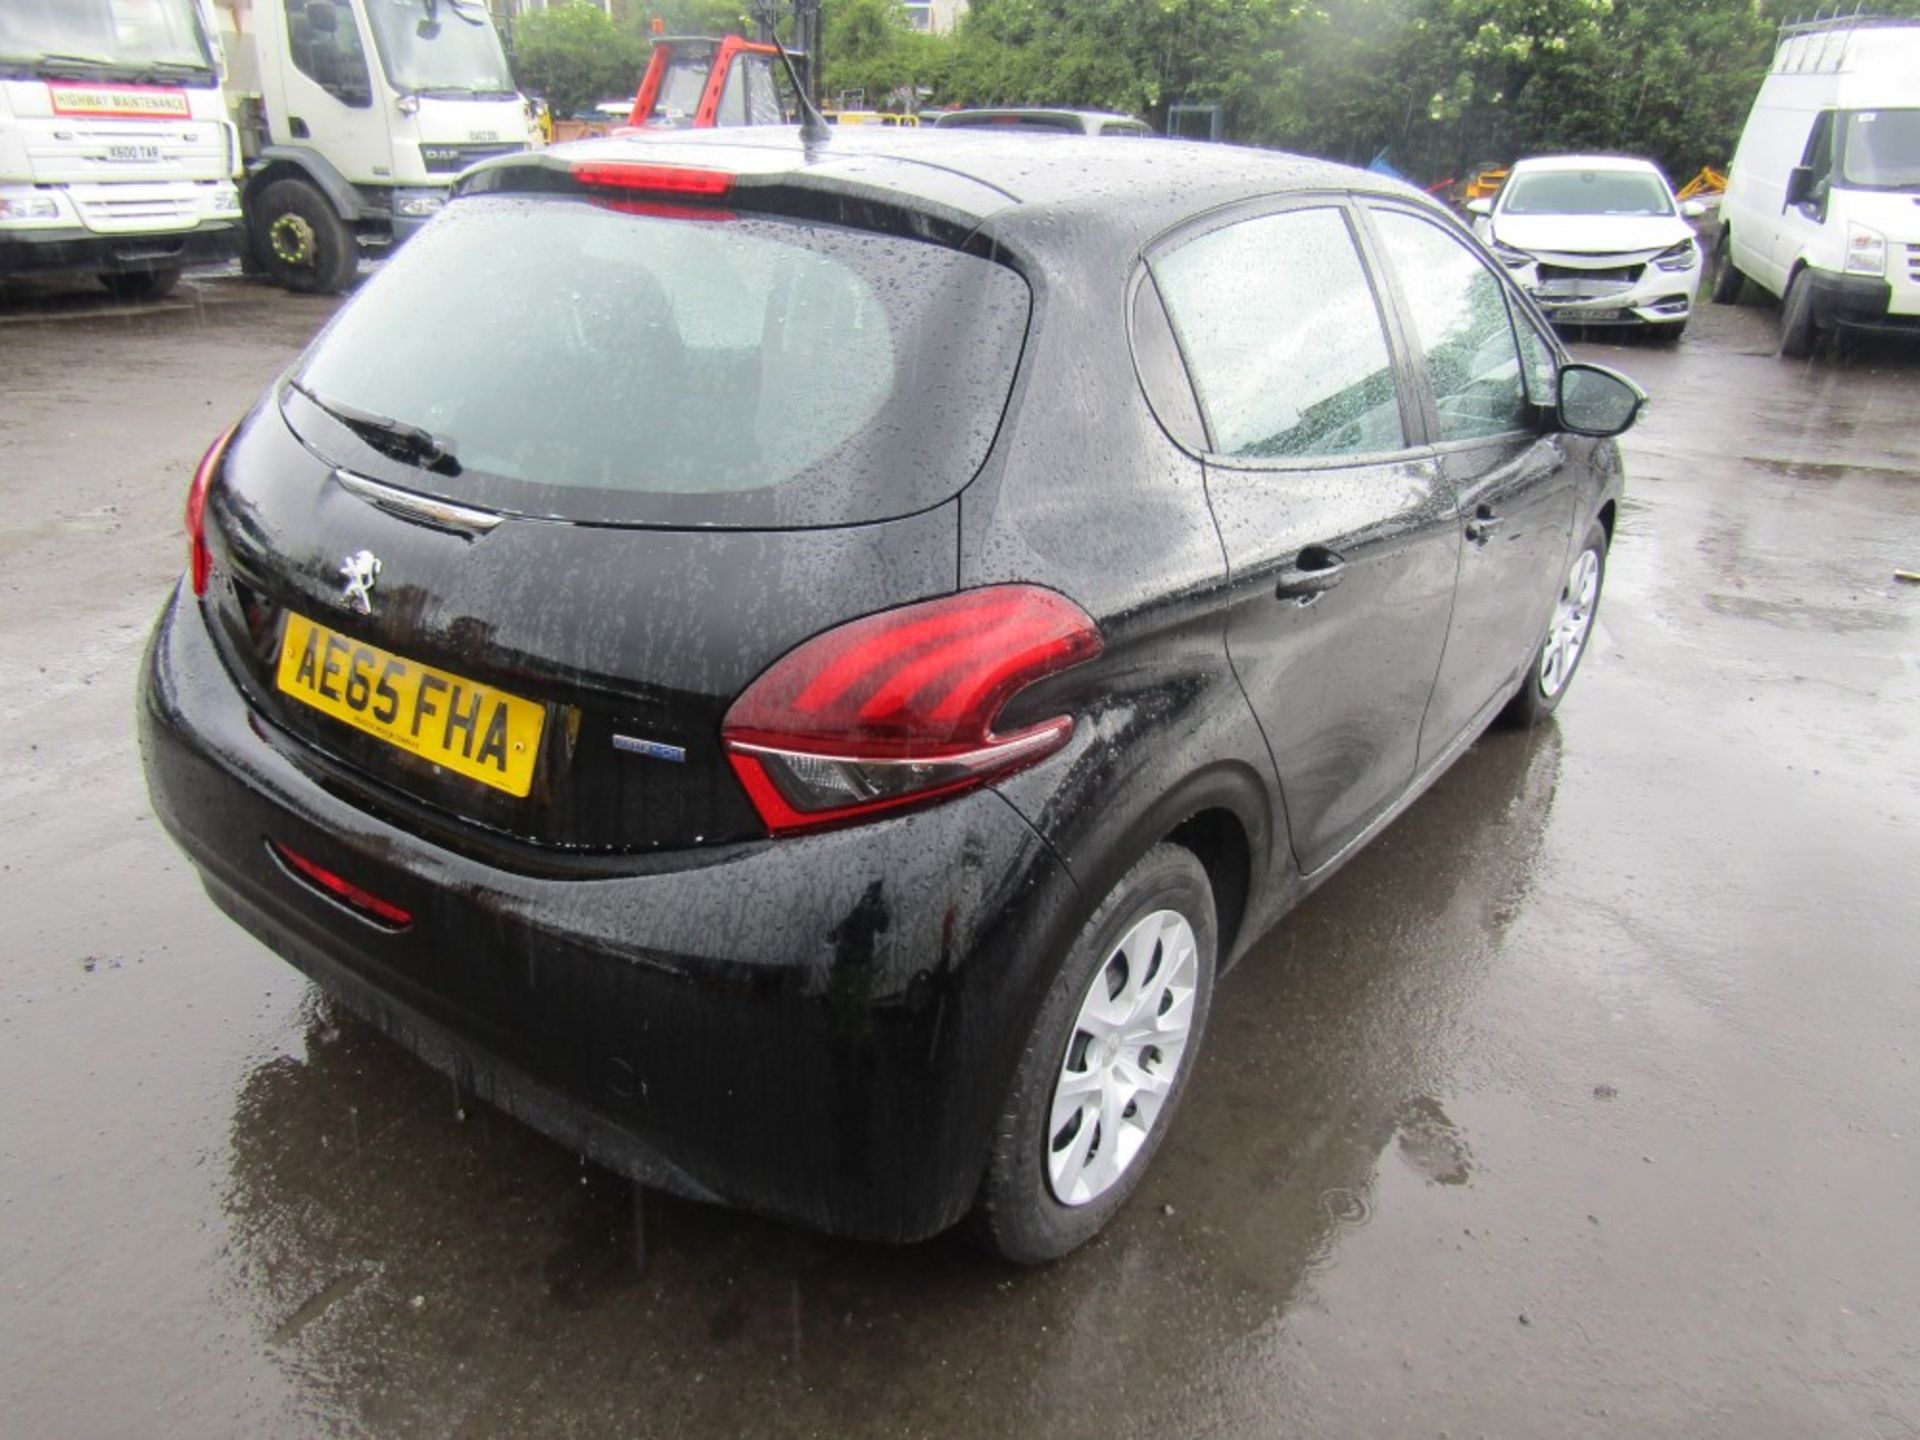 65 reg PEUGEOT 208 HDI, 1ST REG 02/16, 117984M WARRANTED, V5 HERE, 1 OWNER FROM NEW [NO VAT] - Image 4 of 6